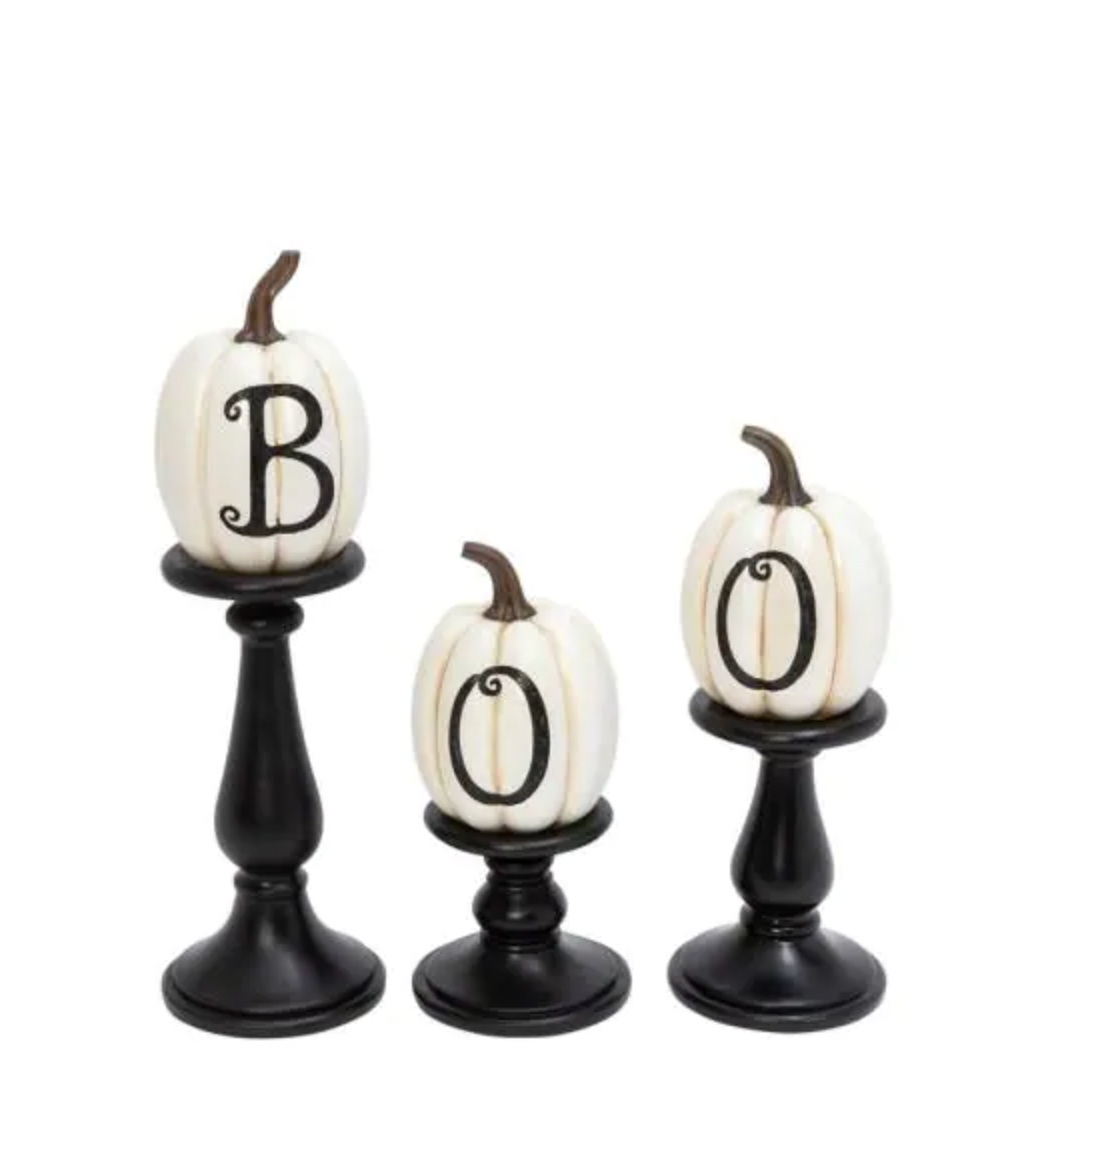 Stone Lettered Pumpkins on Candleholders